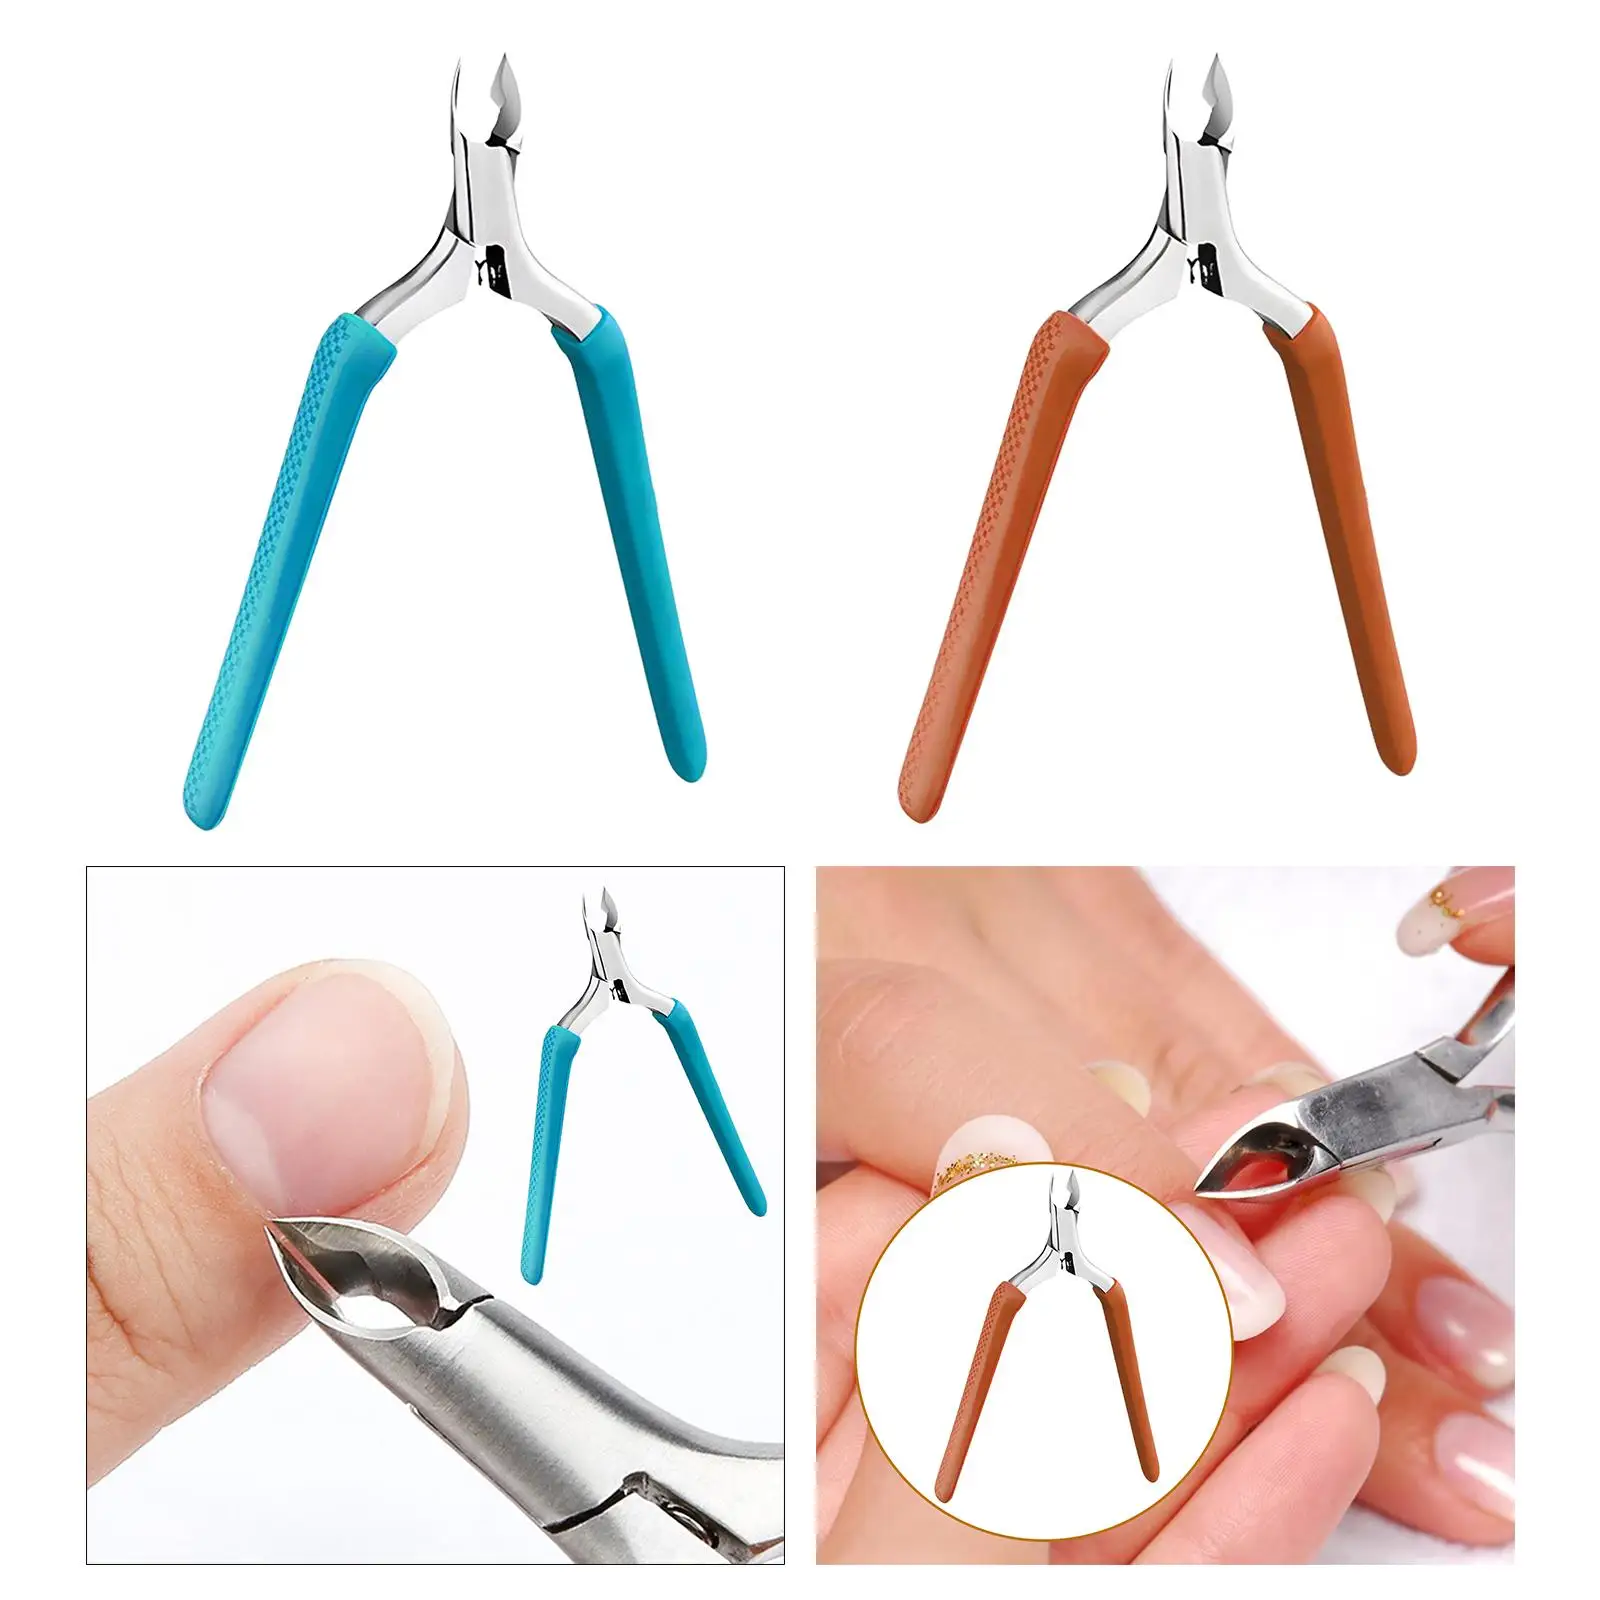 Cuticle Nipper Nail Scissors Cuticle Remover Manicure Tool Strong Dry Skin Remover Cuticle Trimmer for Manicure and Pedicure